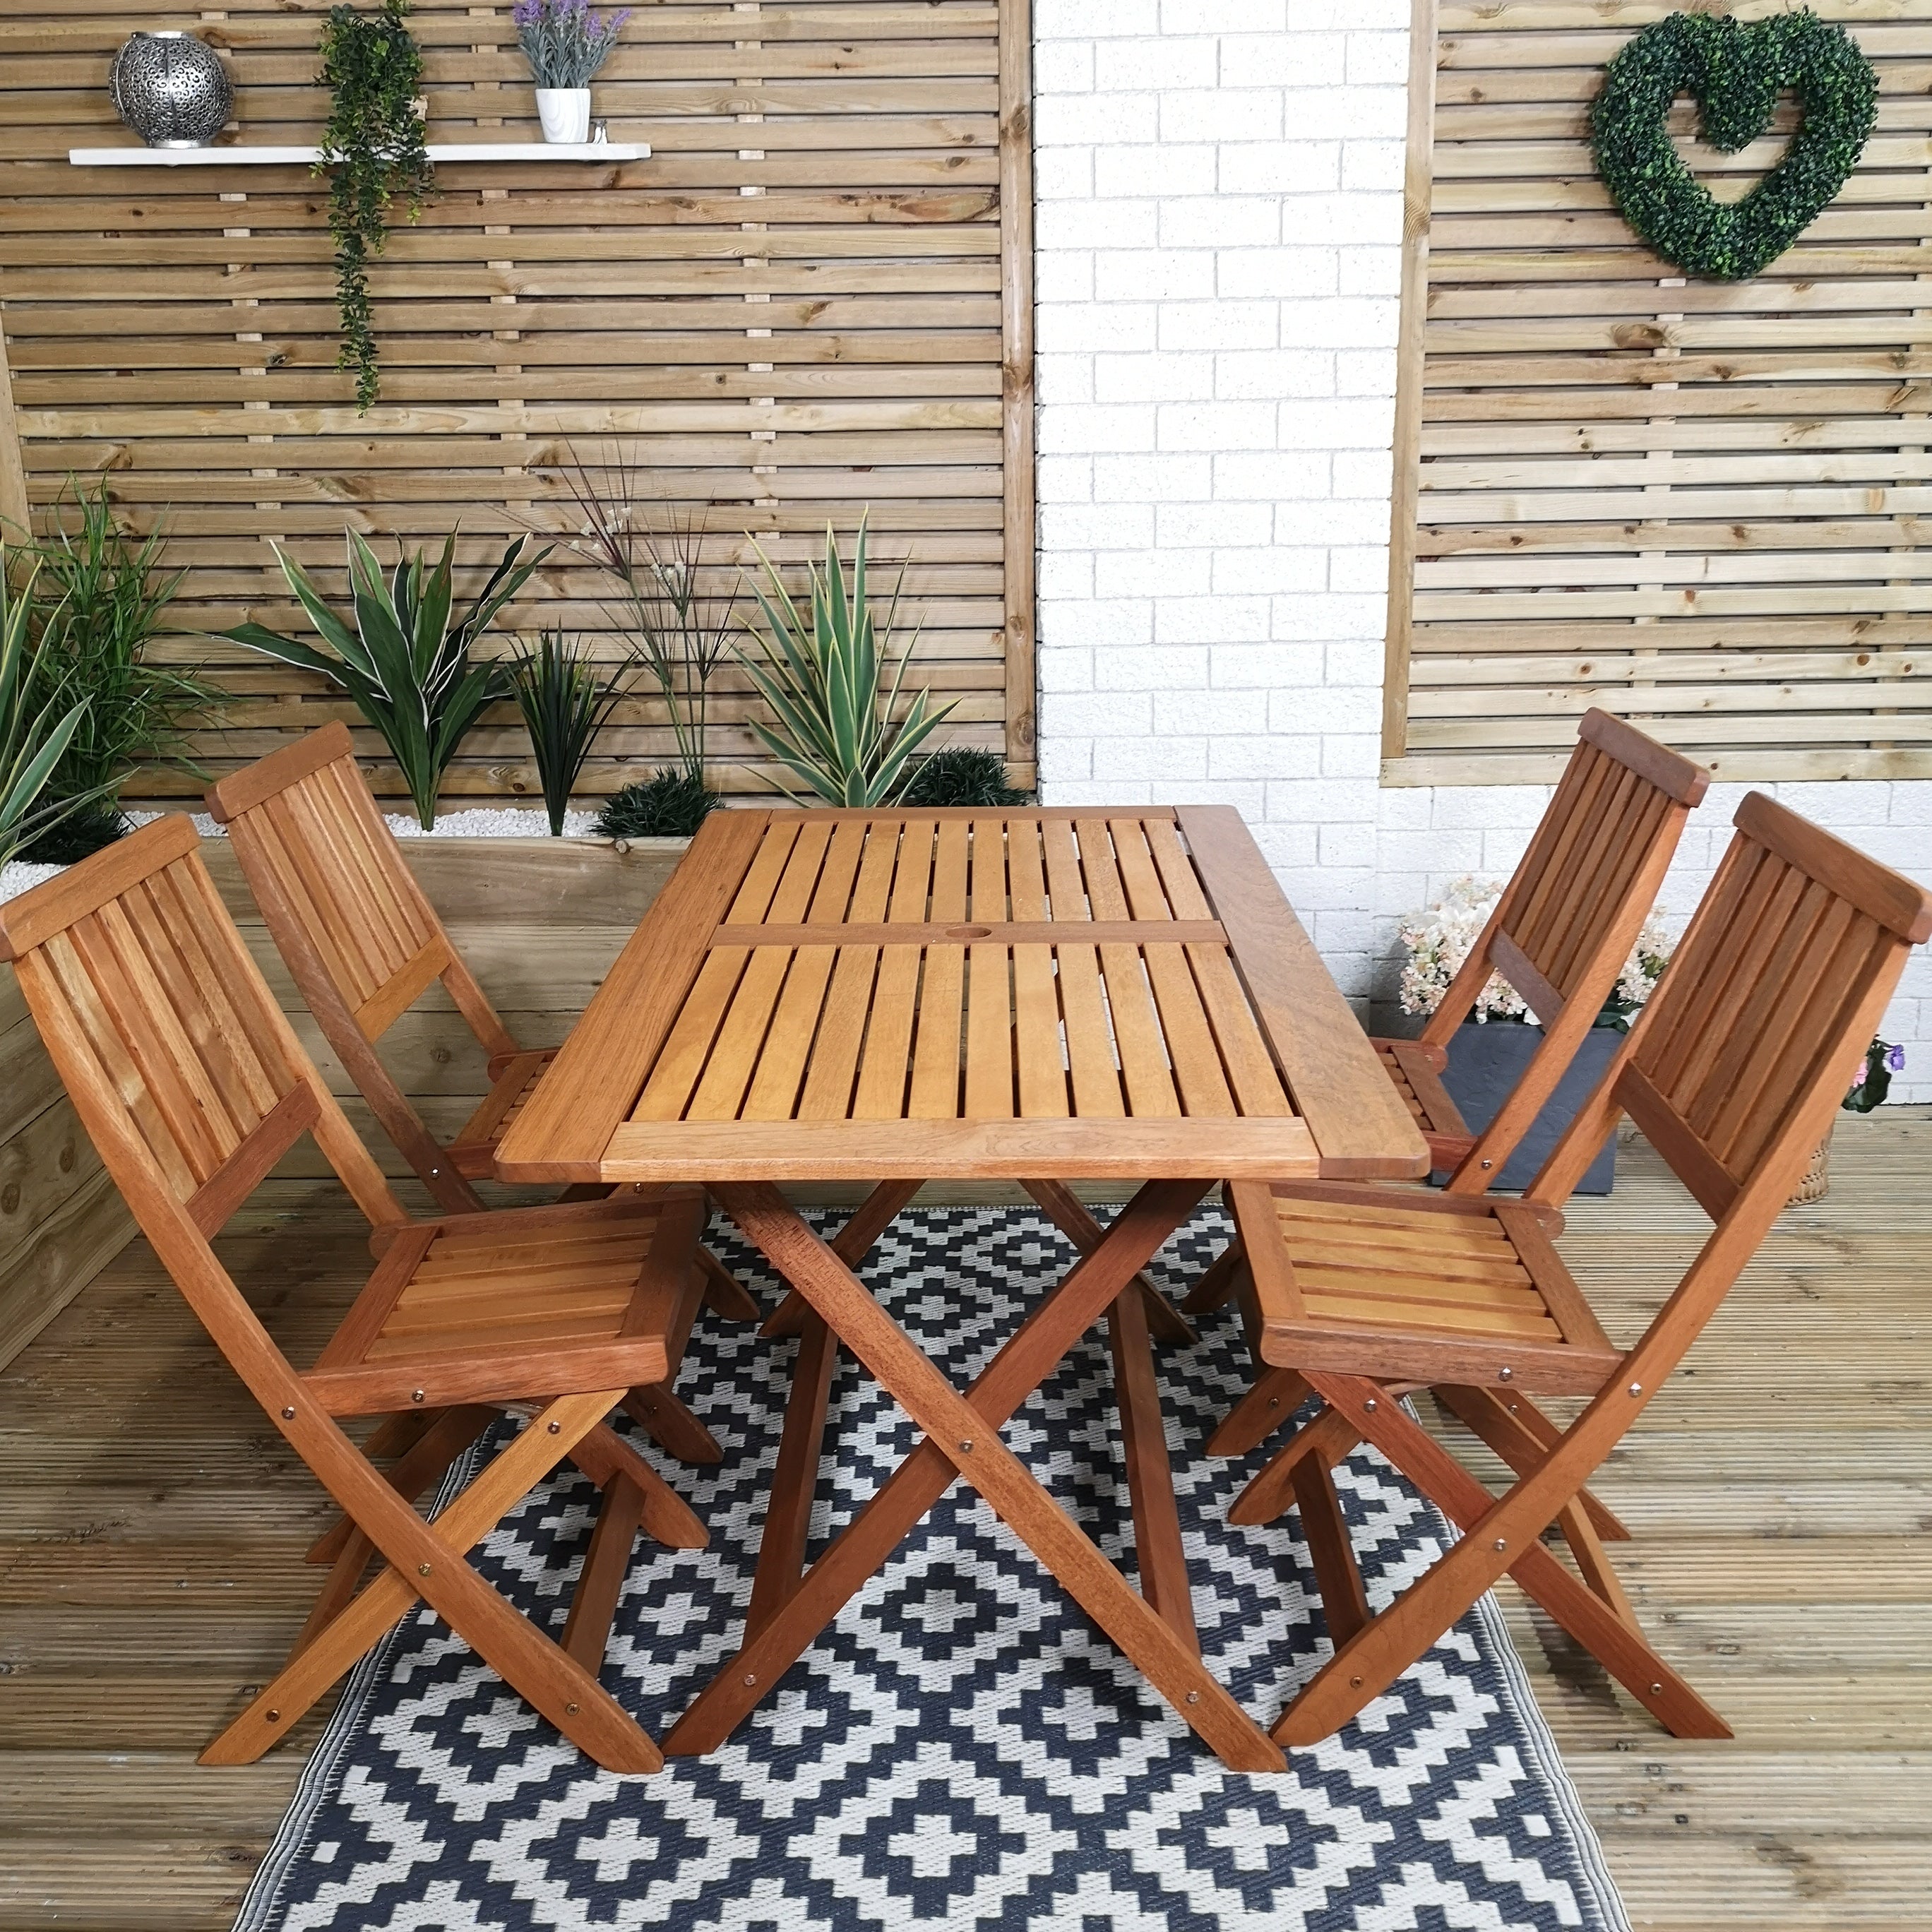 Outdoor 4 Person Folding Rectangular Wooden Garden Patio Dining Table Chairs Set 